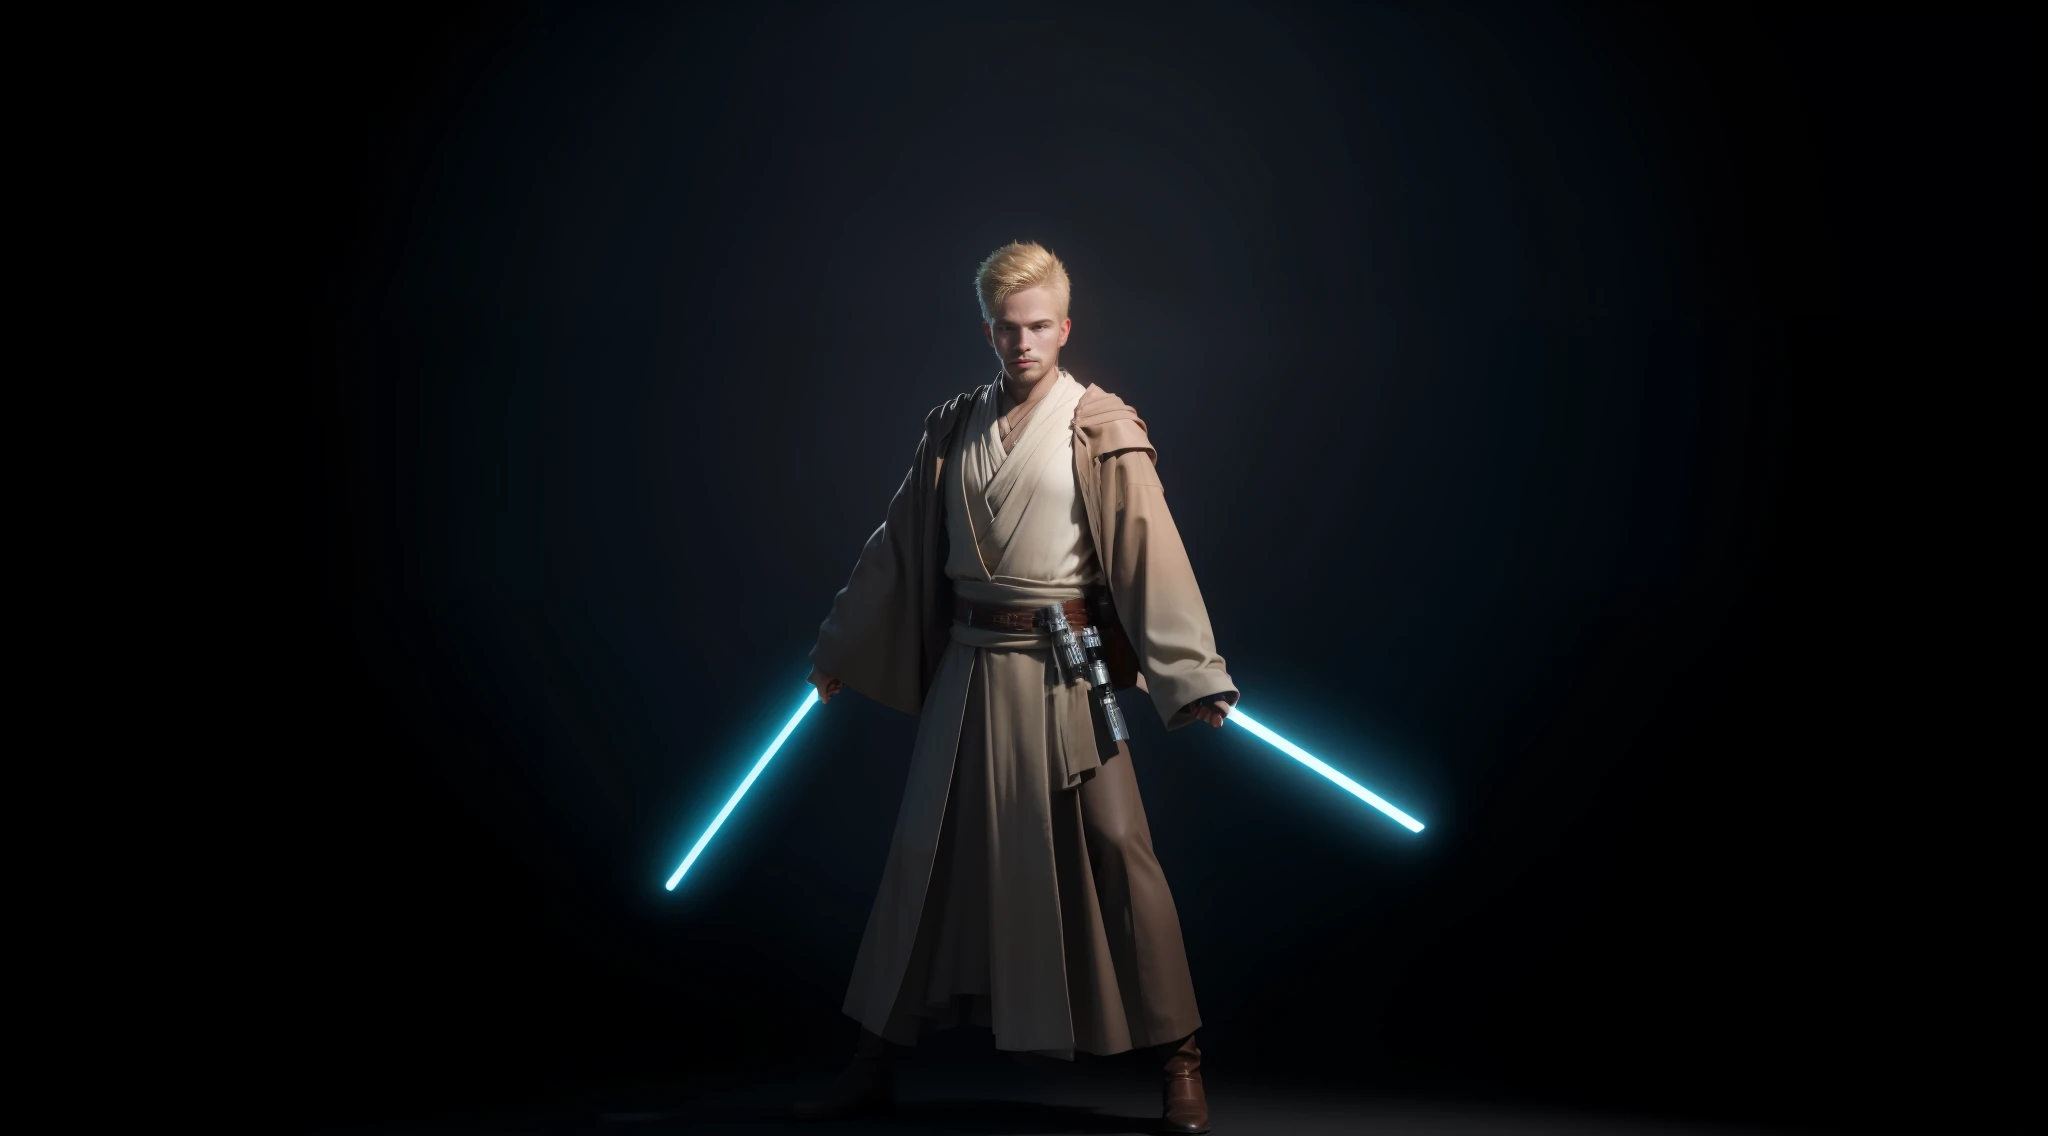 make realistic, 3d graphic young man, blond short hair, white jedi robes